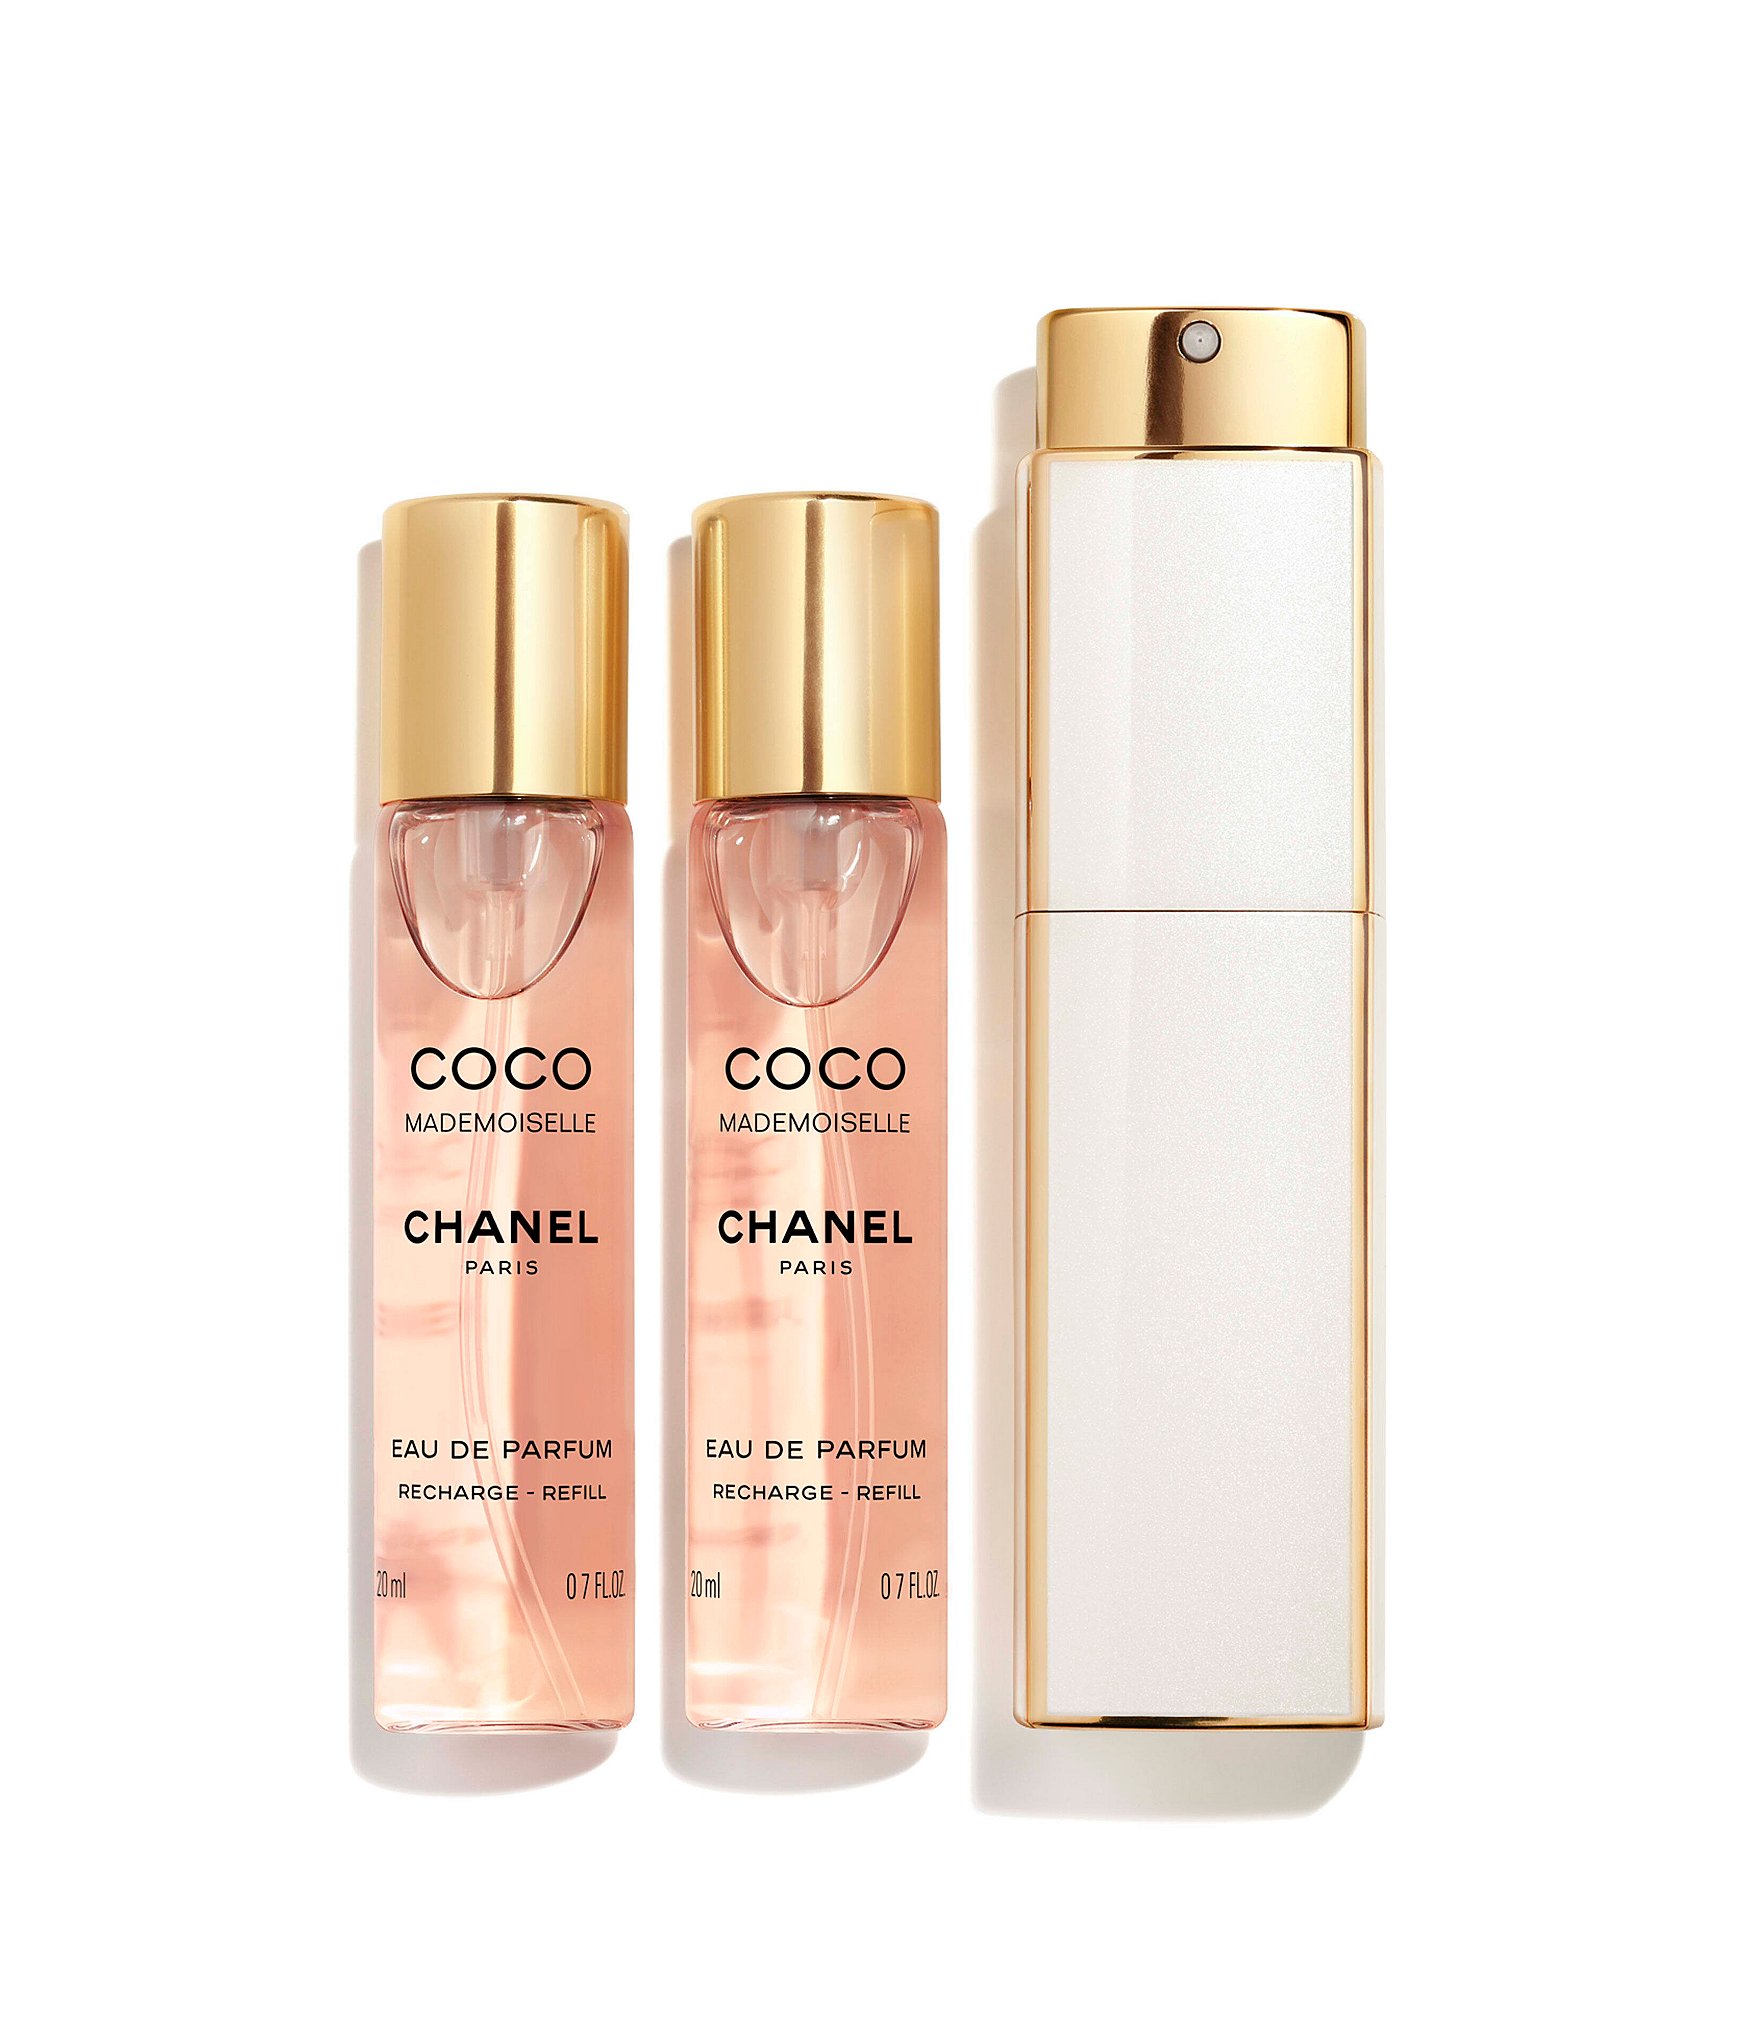 coco chanel perfume roll on